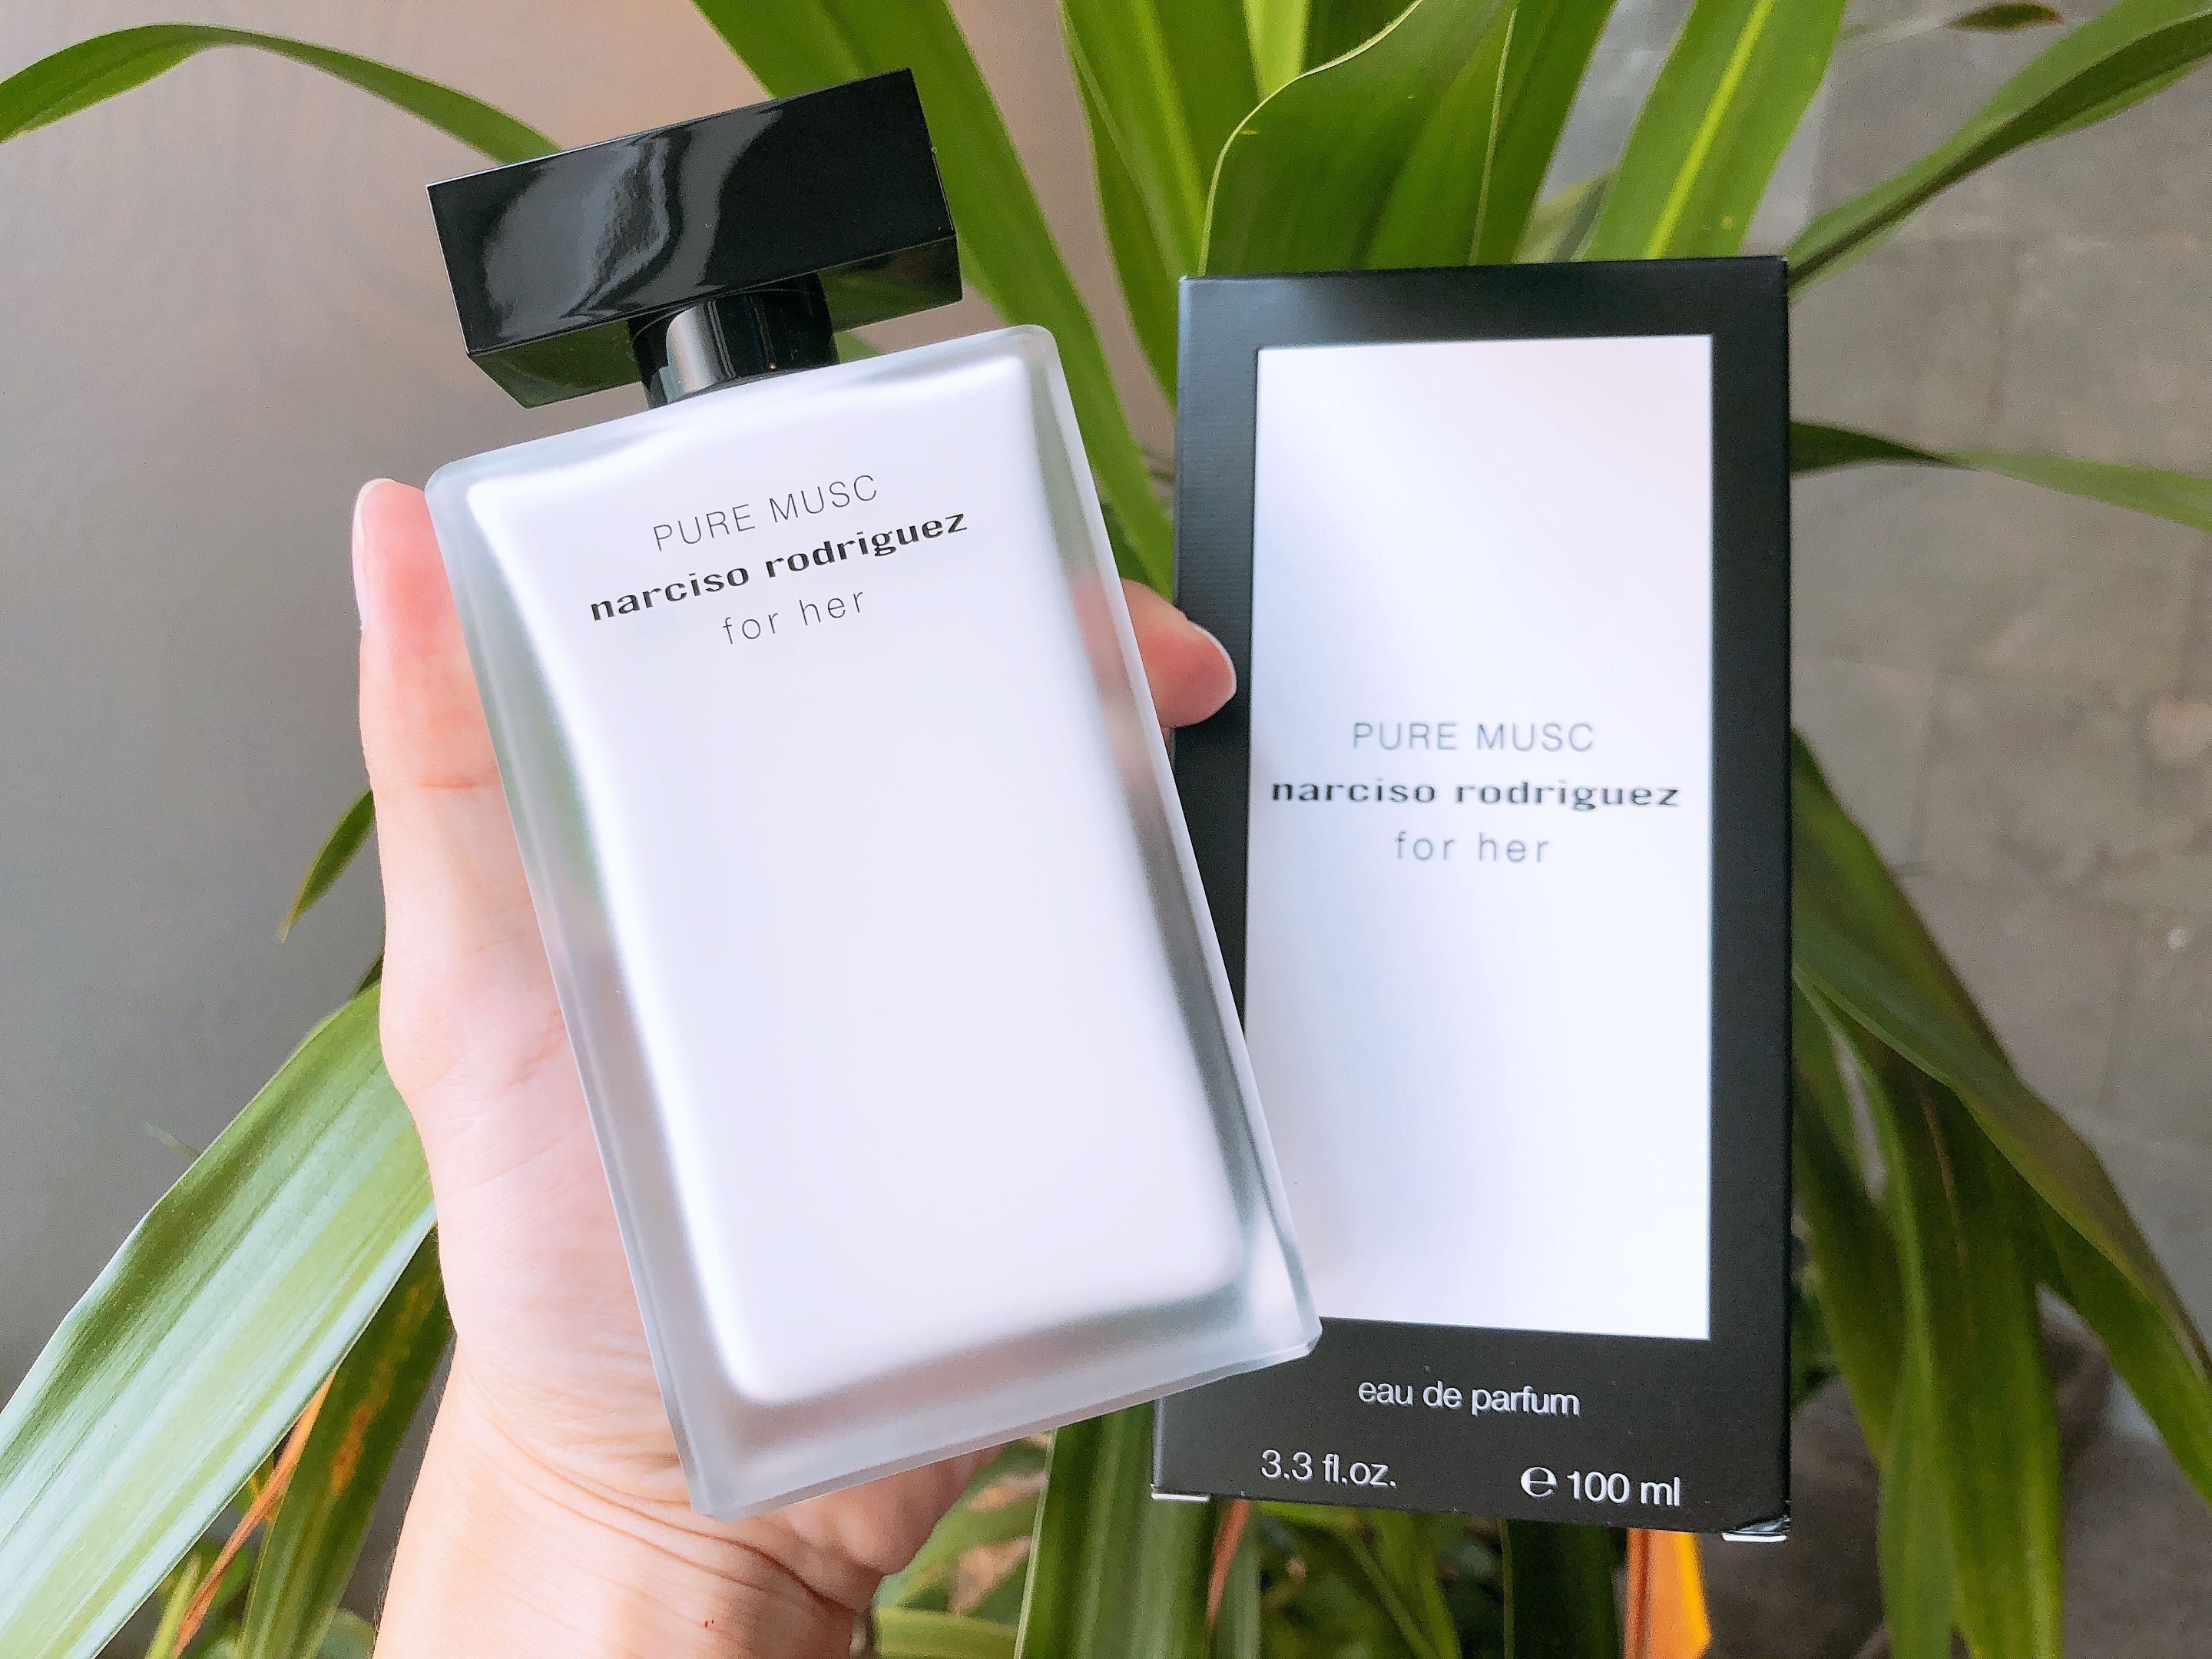 Pure Musc Narciso Rodriguez for her 100 мл. EDP Narciso Rodriguez Pure Musc for her 50 ml. Narciso Rodriguez for her Pure Musc 30 ml. Narciso Rodriguez Pure Musk for her 100 ml. Narciso rodriguez musc купить